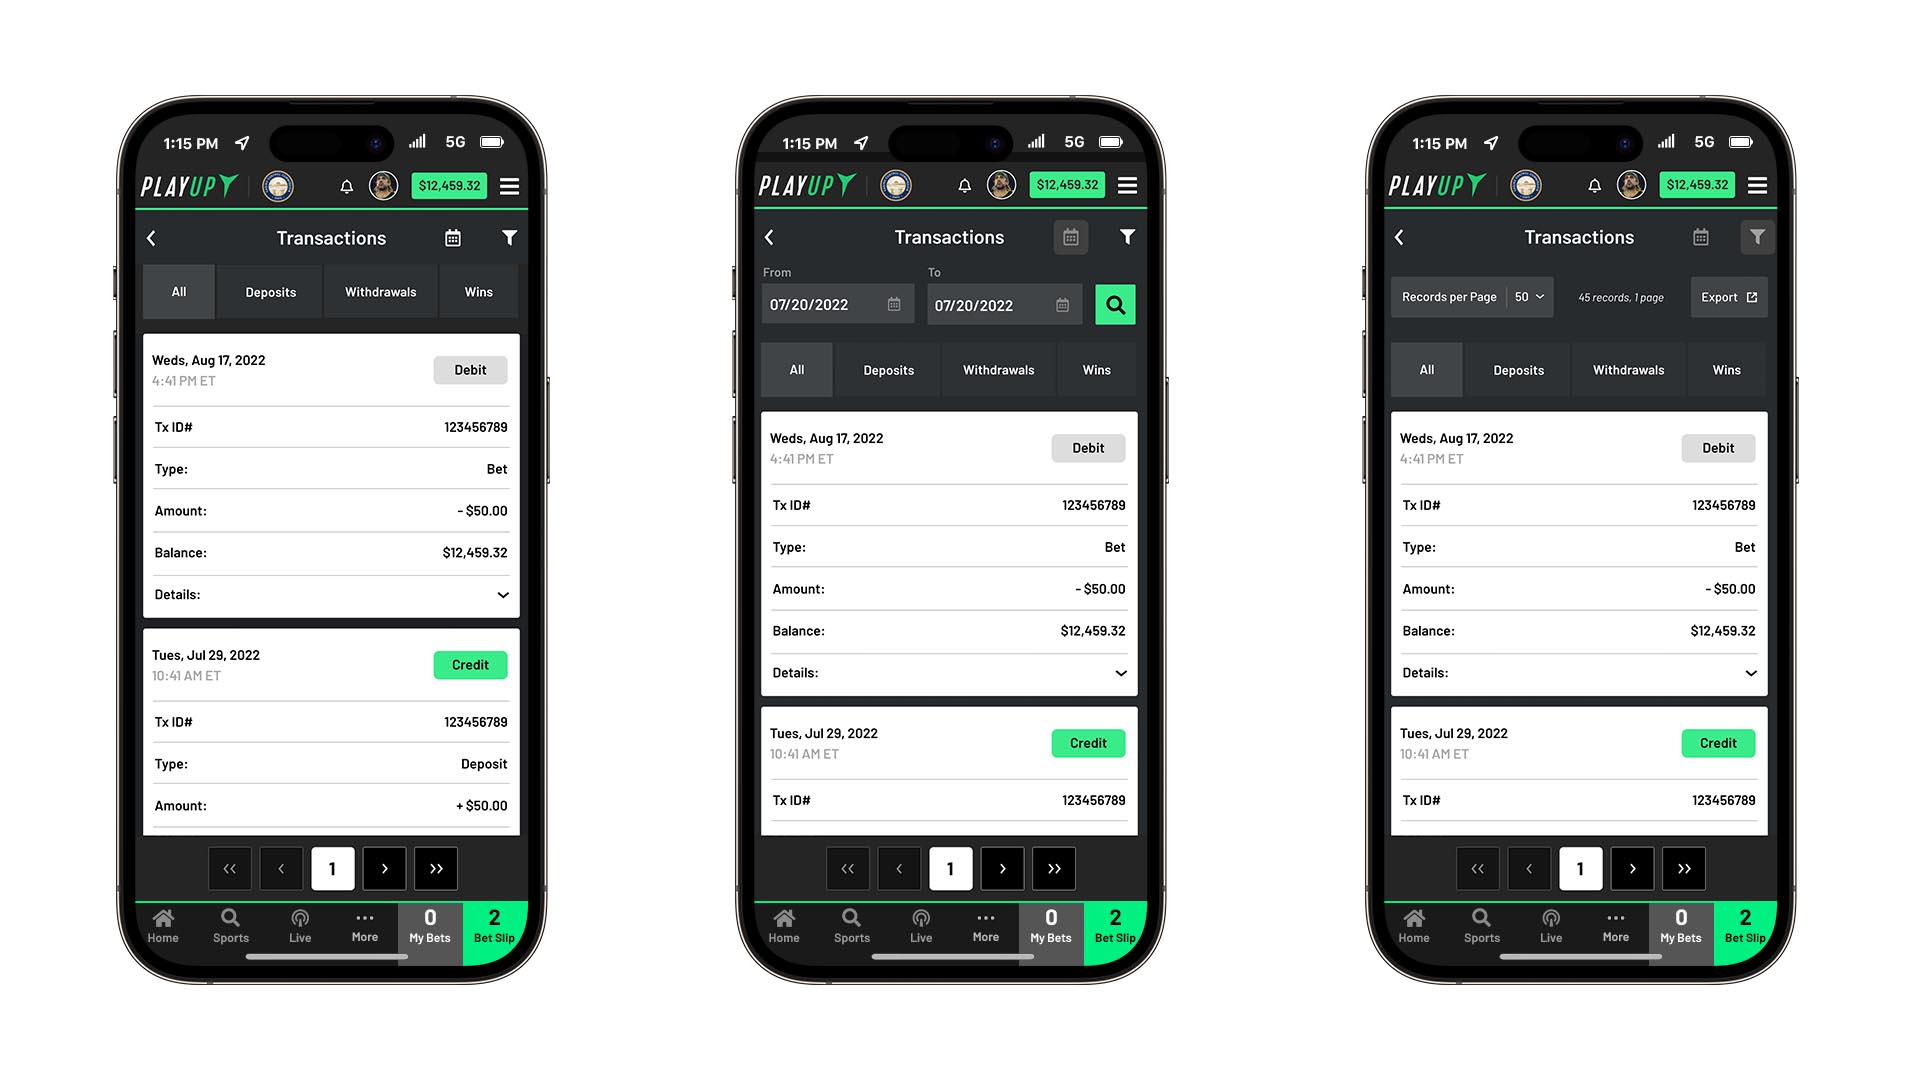 Mobile Sportsbook - Account - Transactions